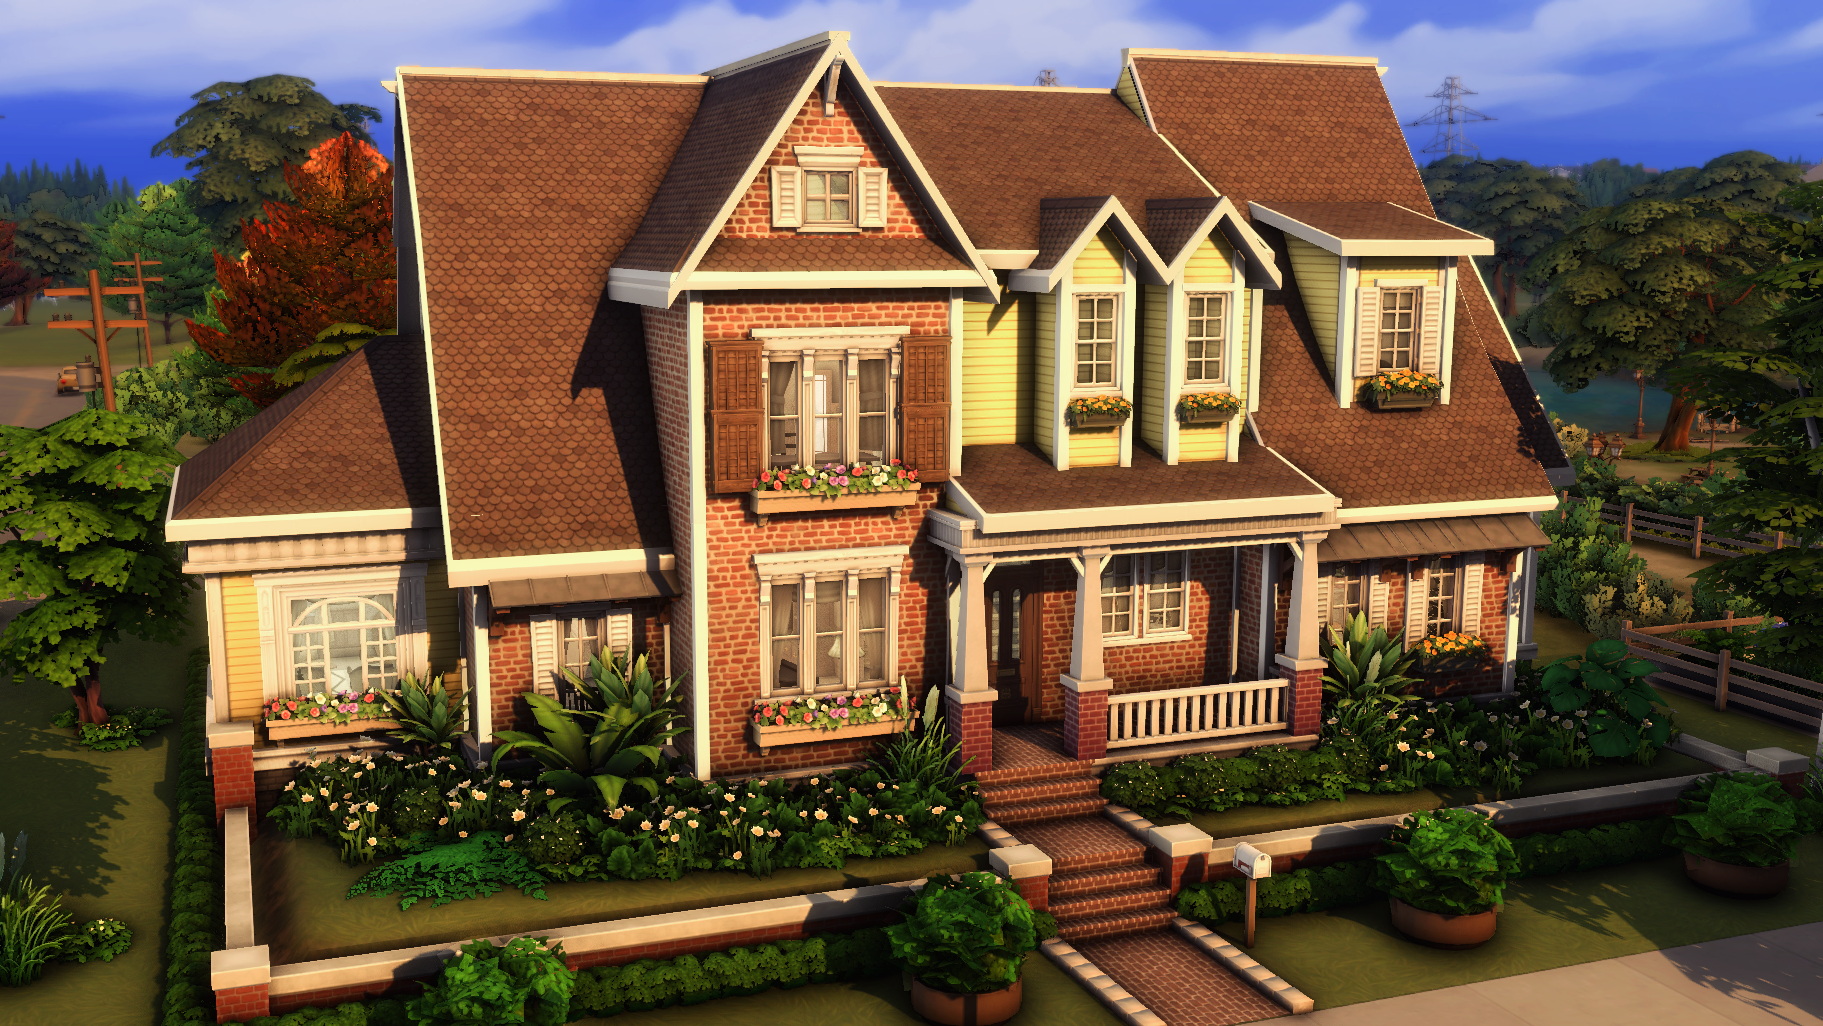 NO CC Farm House by plumbobkingdom from Mod The Sims • Sims 4 Downloads